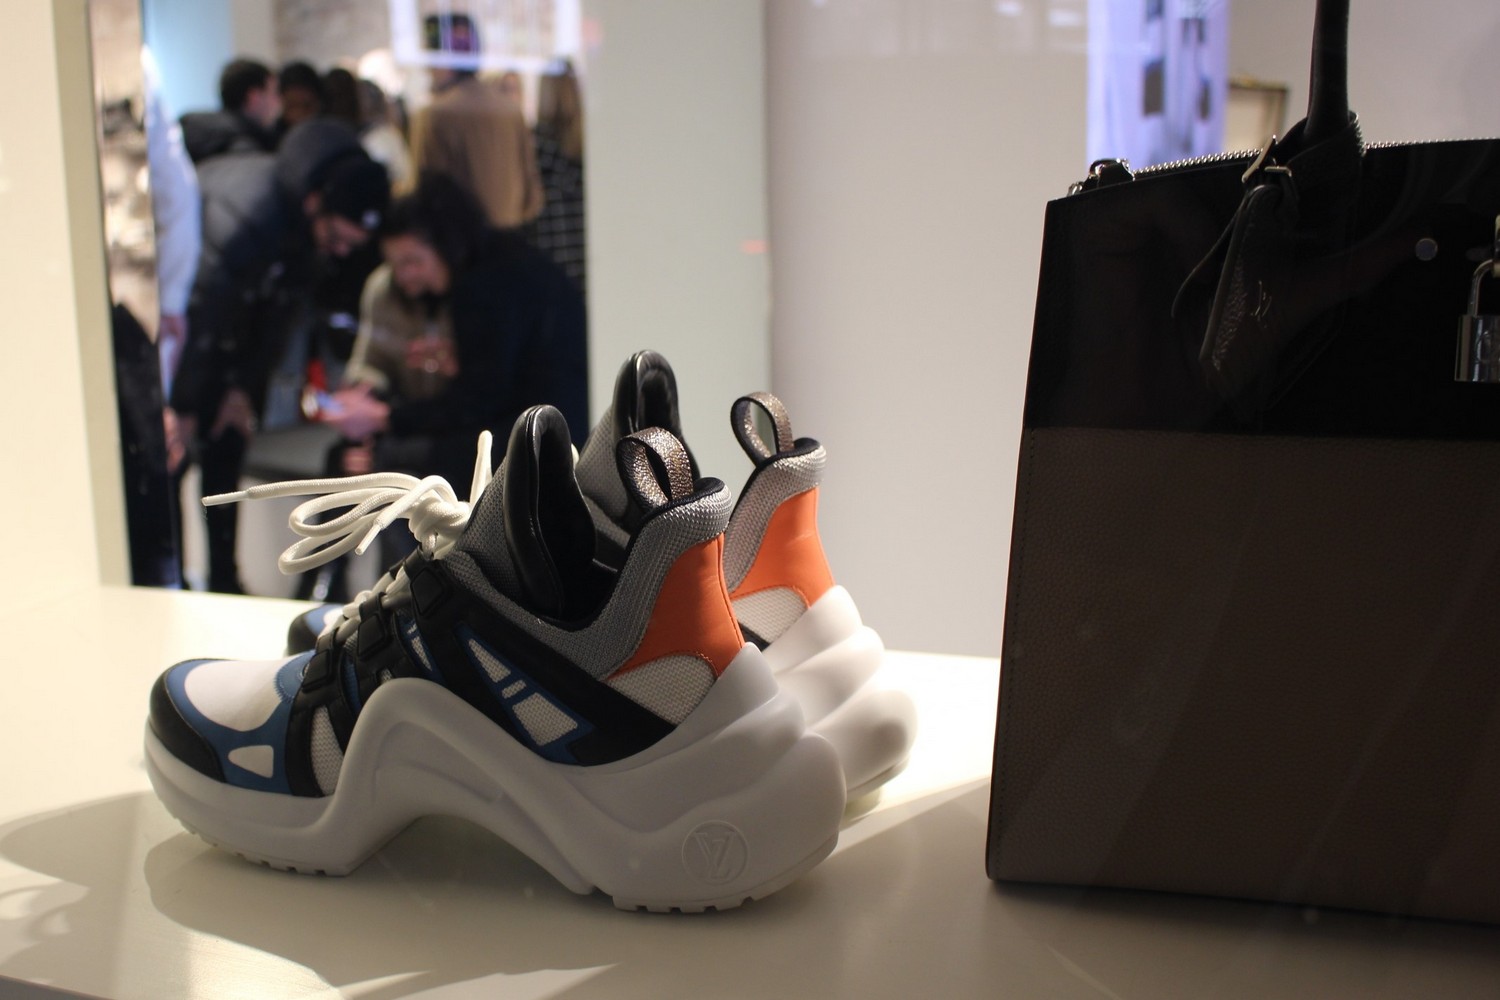 Bright and shiny - Louis Vuitton archlight sneakers steal the show